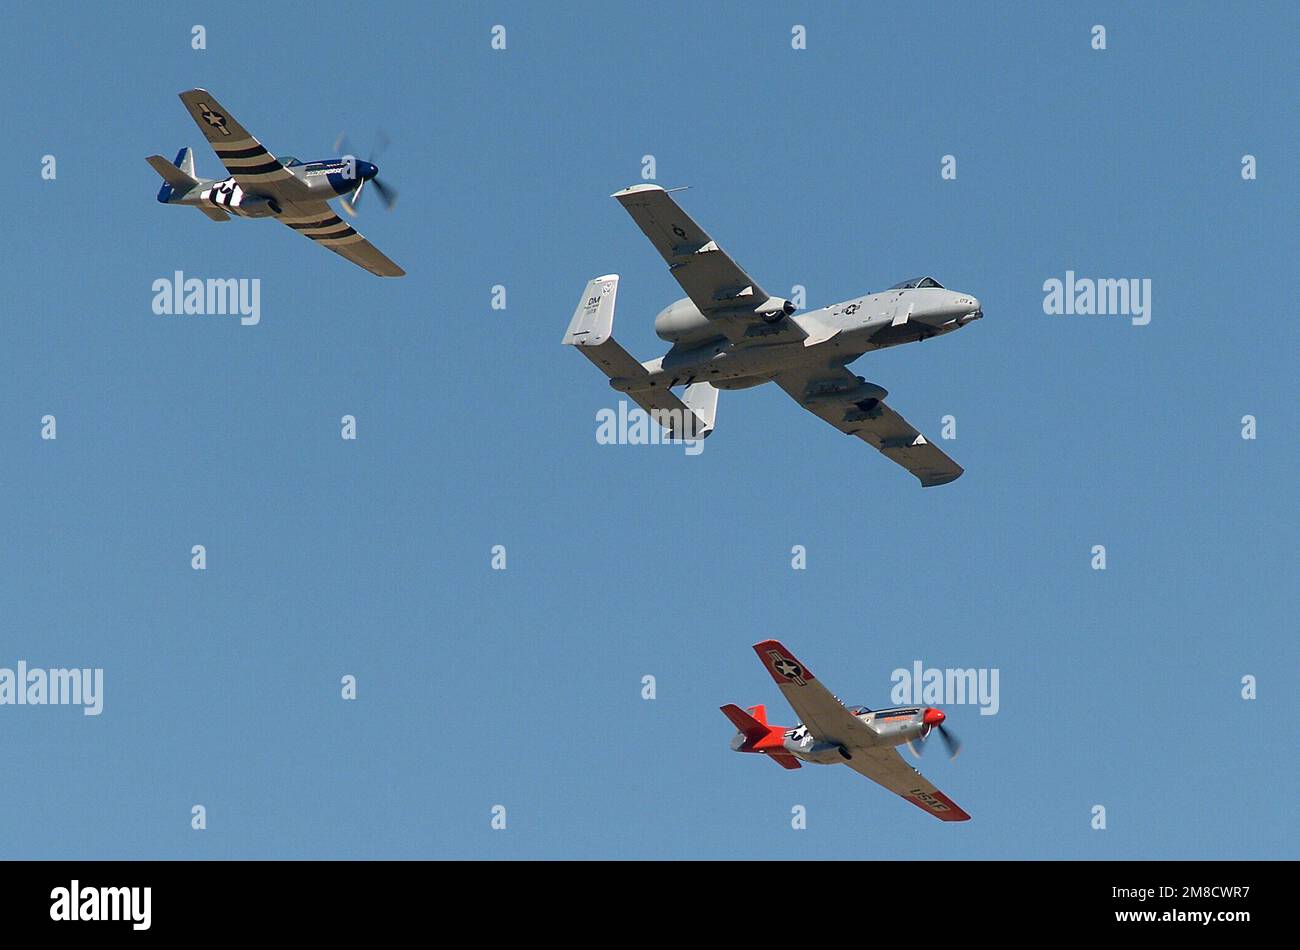 040306-F-3745E-064. Two World War II (WW II) era P-51 Mustang pursuit (fighter) aircraft fly in formation with an US Air Force (USAF) A-10A Thunderbolt II “Warthog” attack aircraft (center) during the Heritage Conference being held at Davis-Montham Air Force Base (AFB), Arizona (AZ). Stock Photo